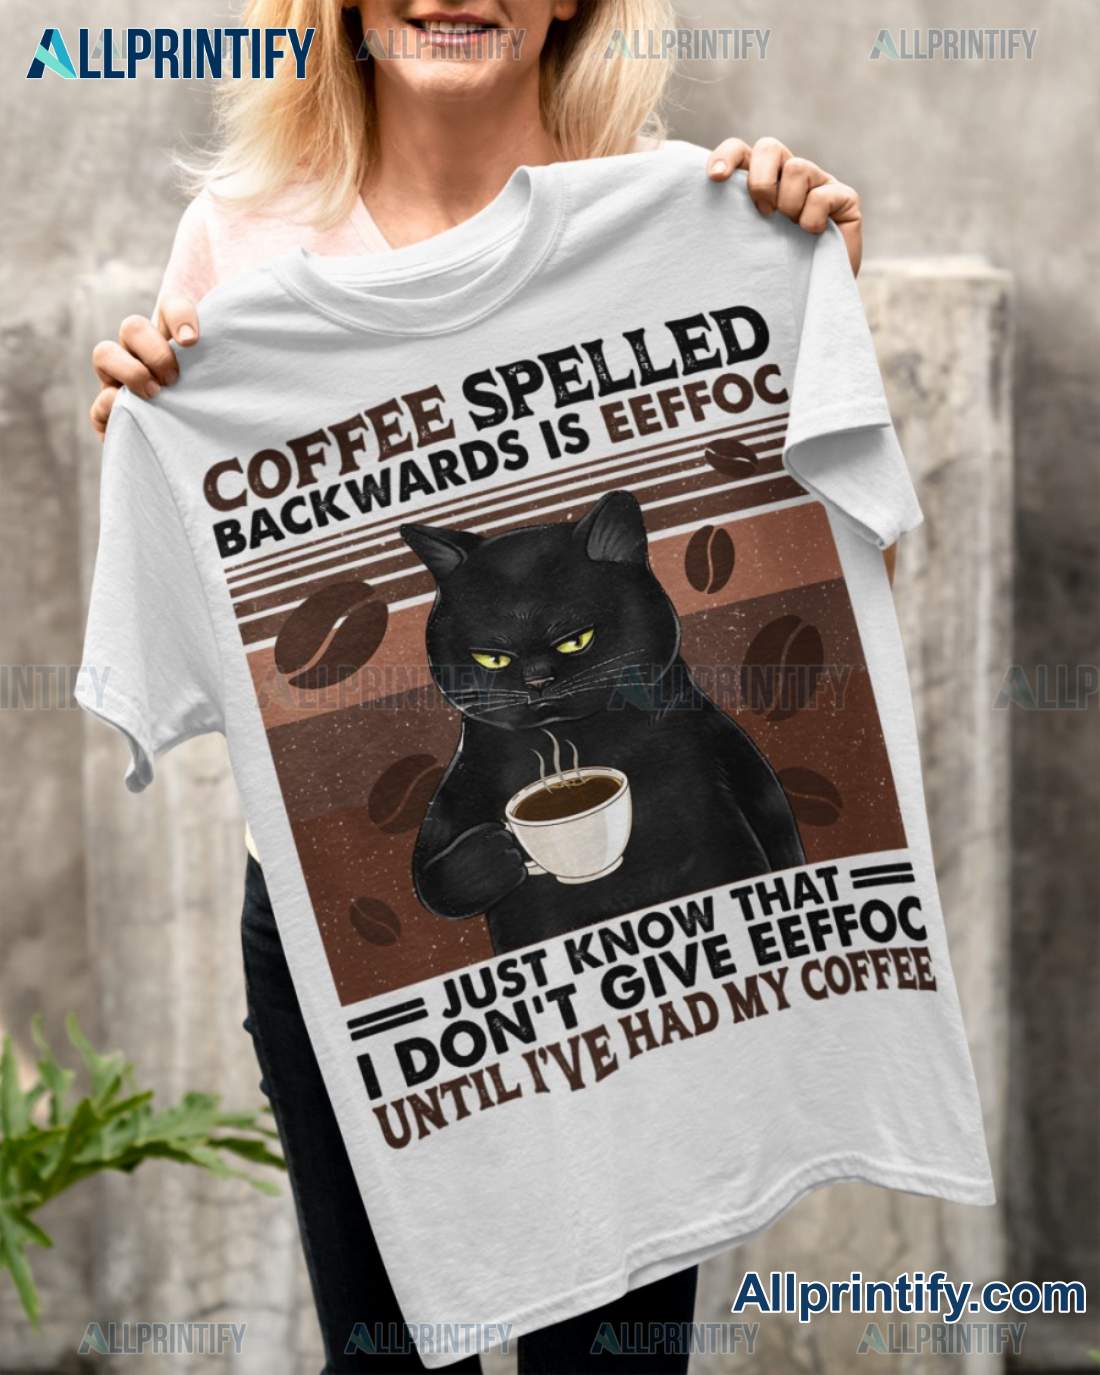 Cat Coffee Spelled Backwards Is Eeffoc Just Know That I Don't Give Eeffoc Until I've Had My Coffee Shirt